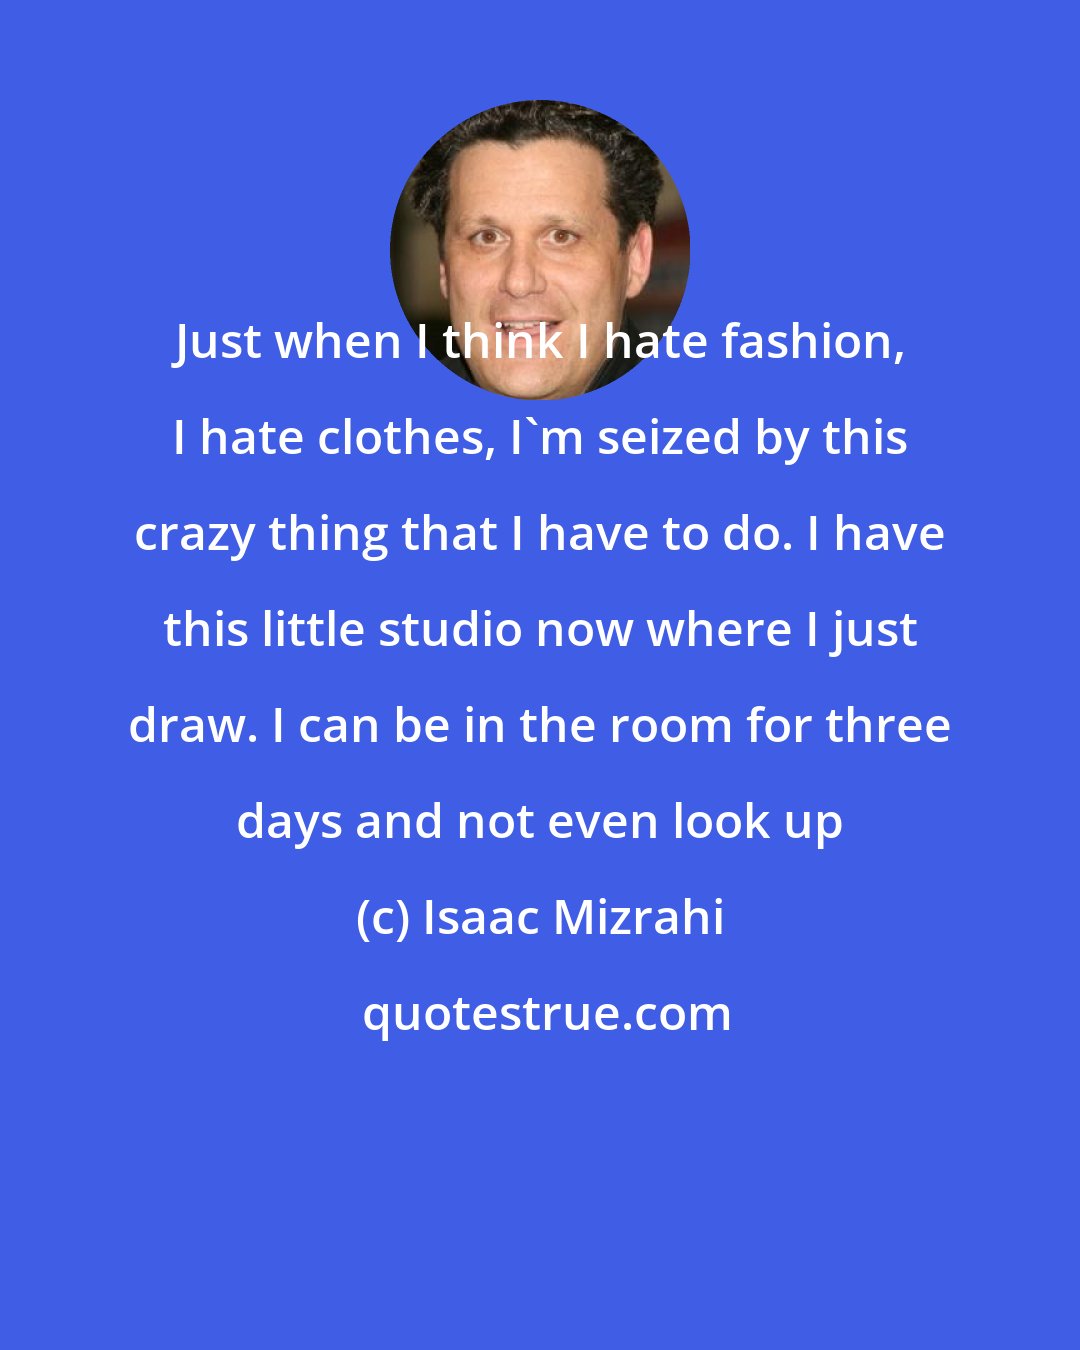 Isaac Mizrahi: Just when I think I hate fashion, I hate clothes, I'm seized by this crazy thing that I have to do. I have this little studio now where I just draw. I can be in the room for three days and not even look up